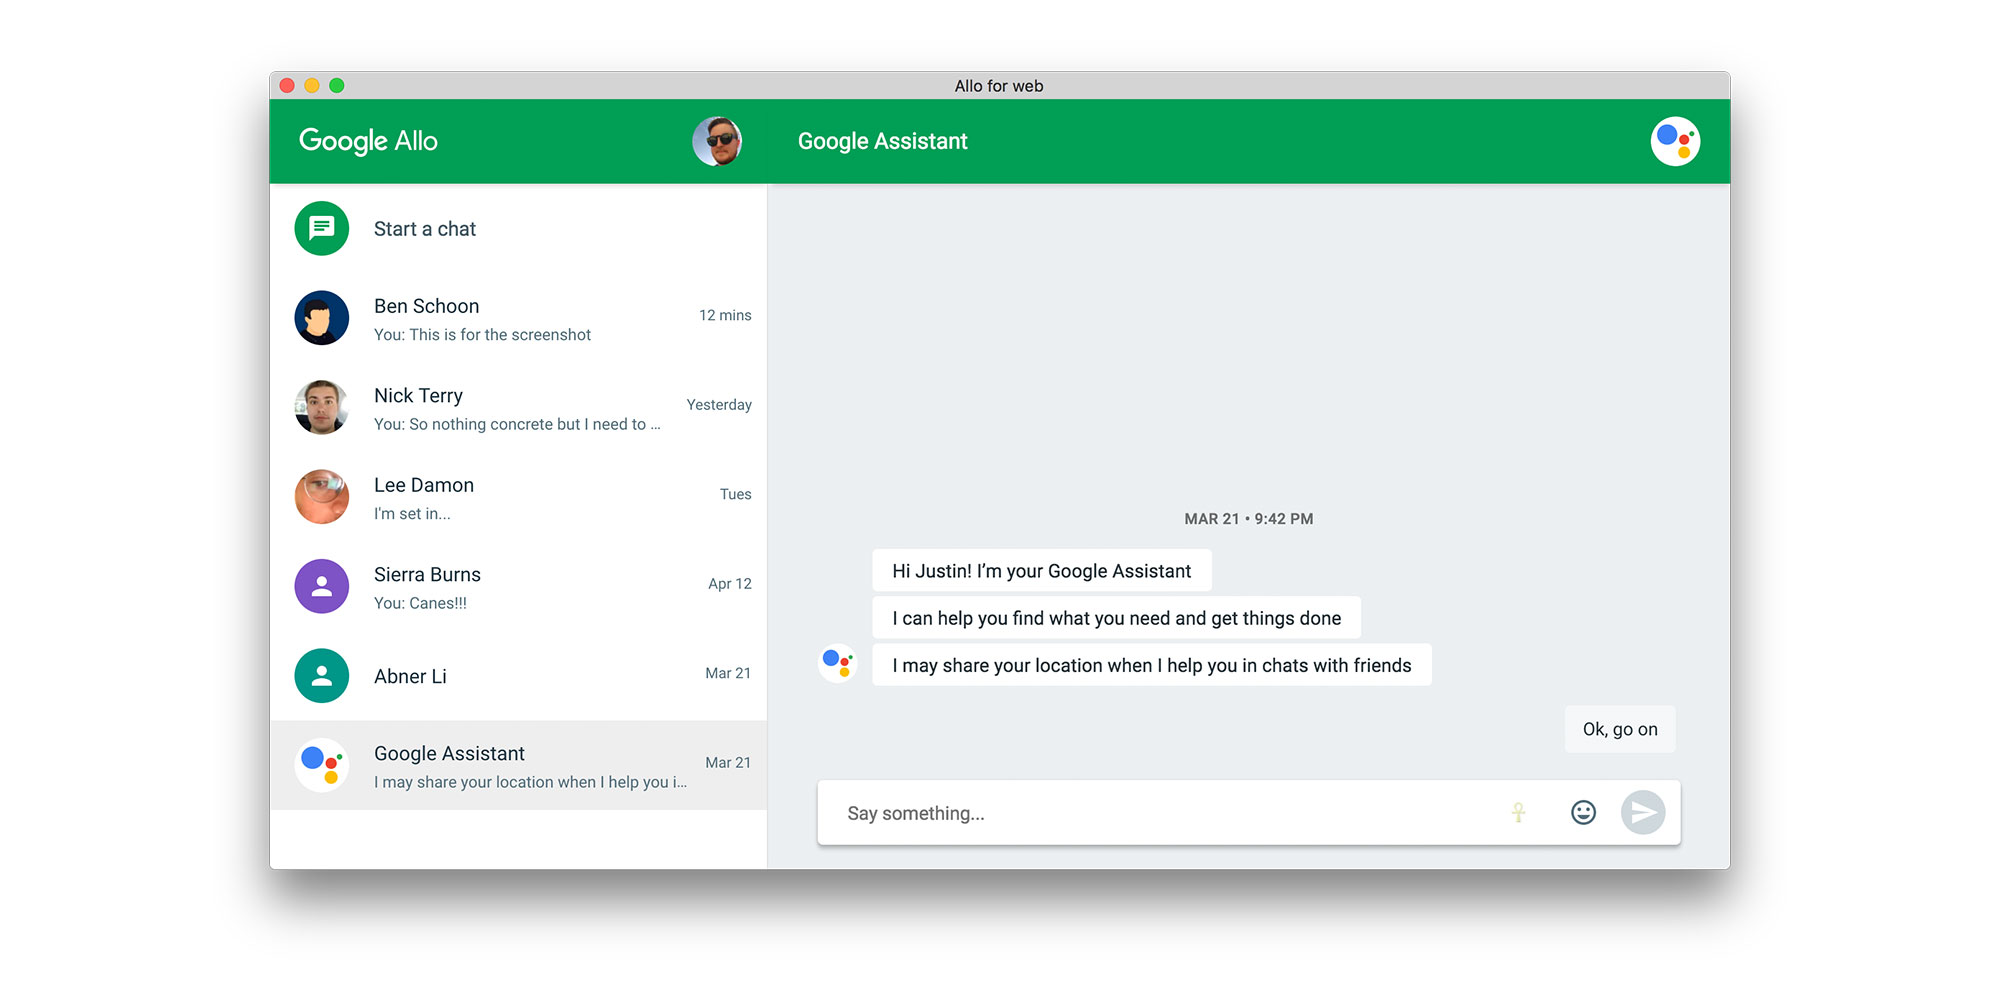 google hangouts stopped working